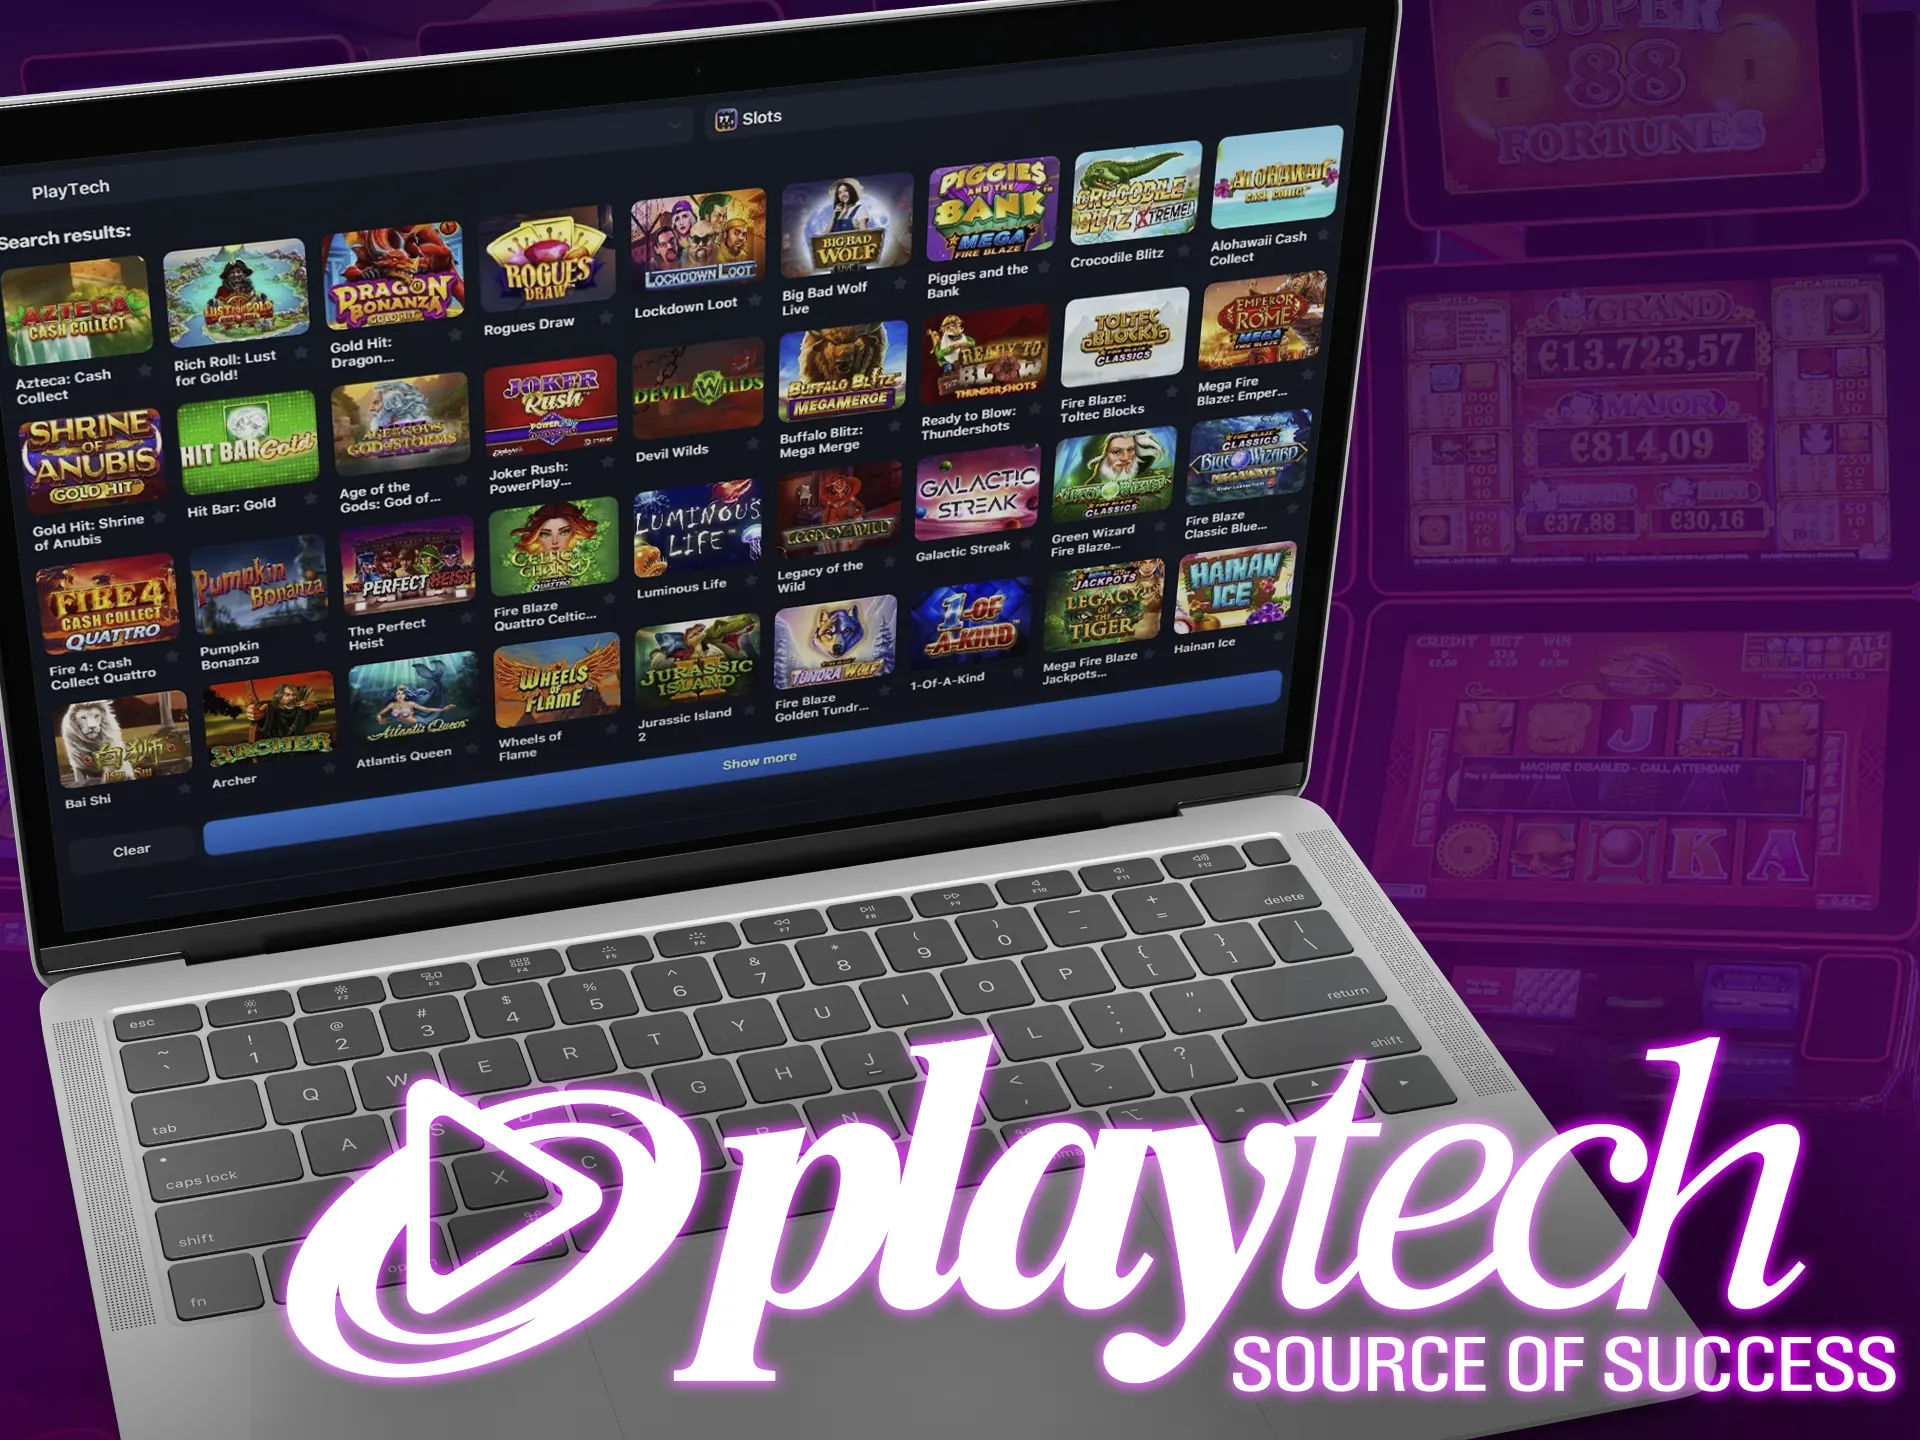 Playtech provider, a big name in gaming, is a global tech giant with 500+ games.